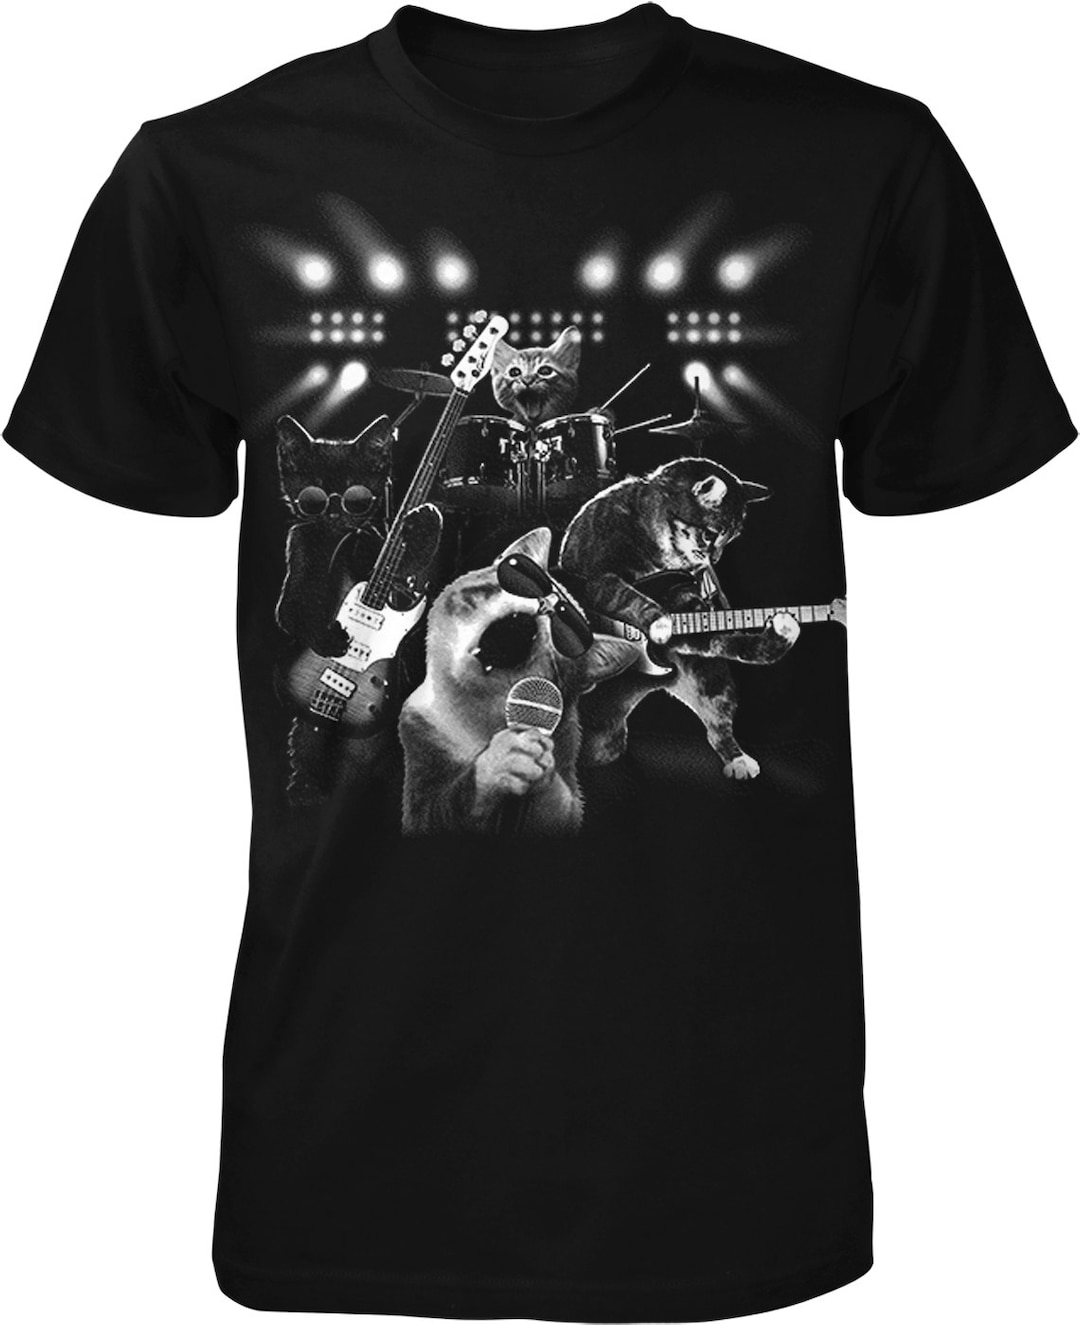 Cat Rock Band, Cats Playing Guitar and Drums Men's T-shirt, NOFO_00460 ...